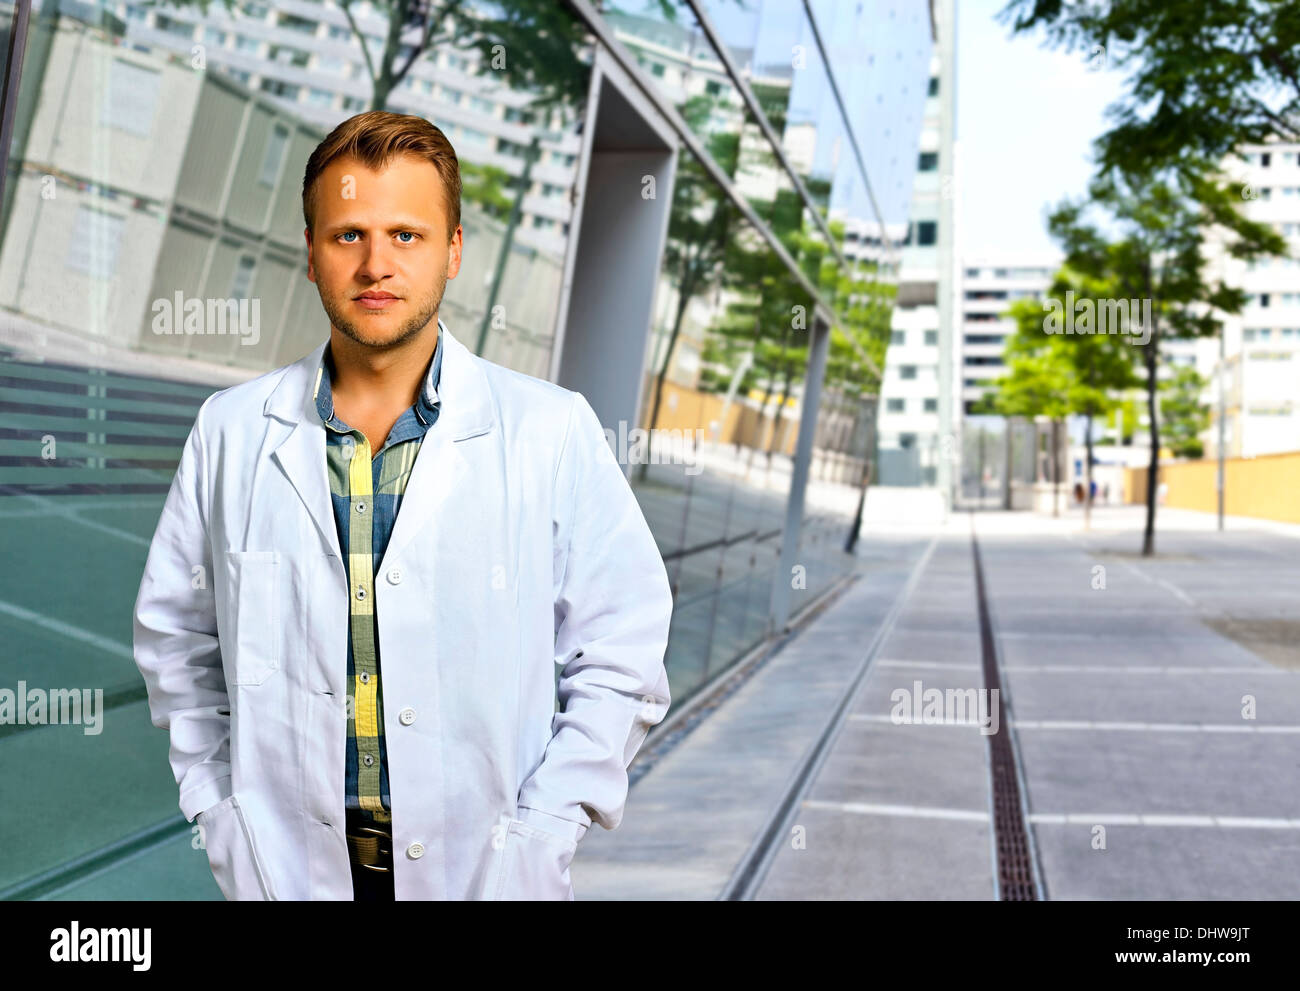 Young Scientist or doctor with confident personality standing in urban area Stock Photo